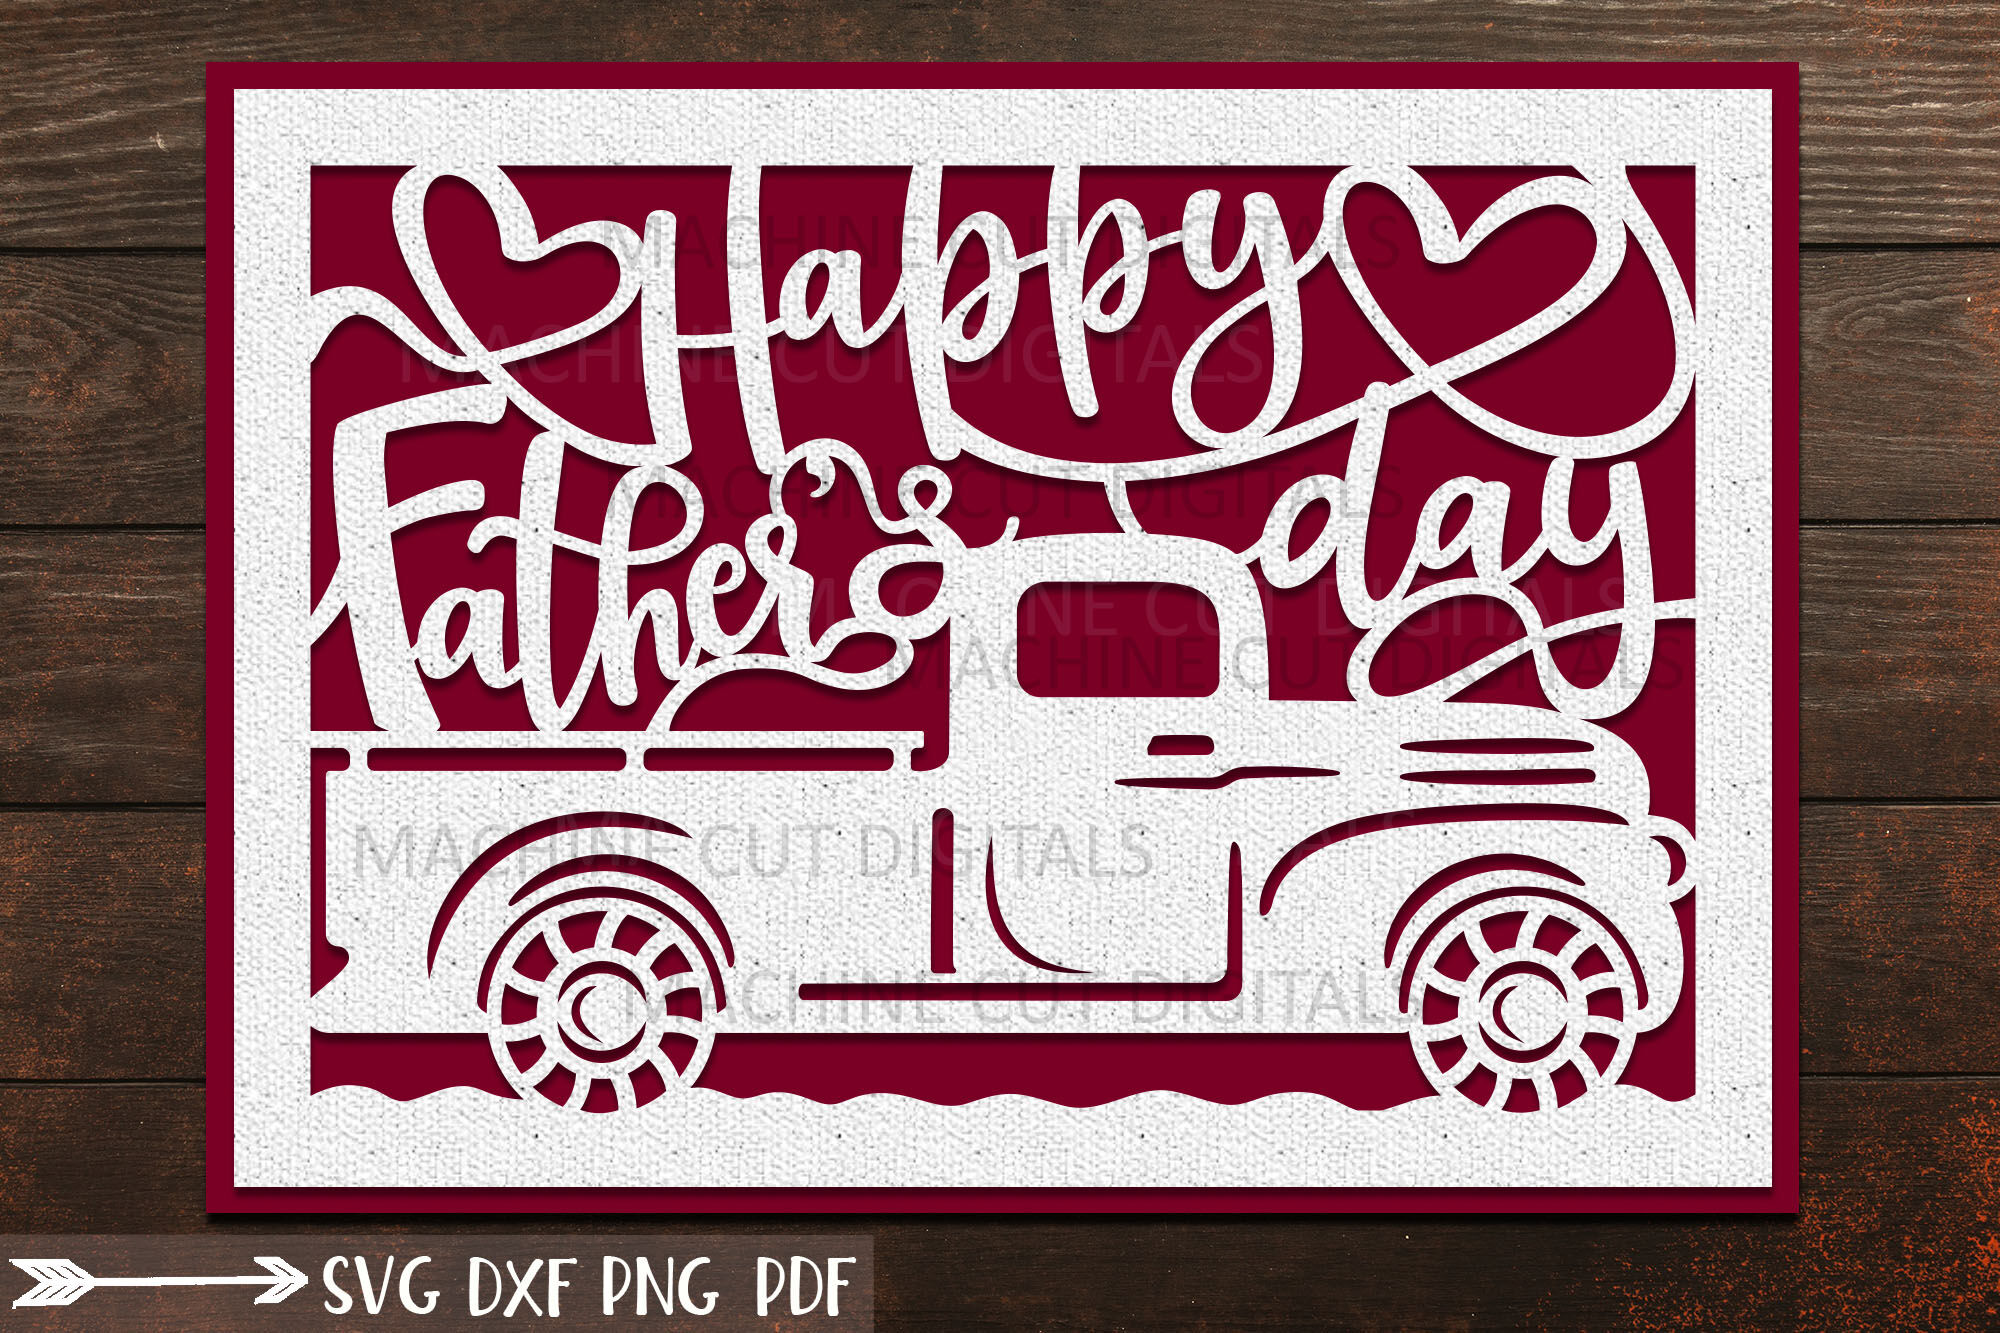 Happy Fathers Day card svg dxf laser cricut cut out ...